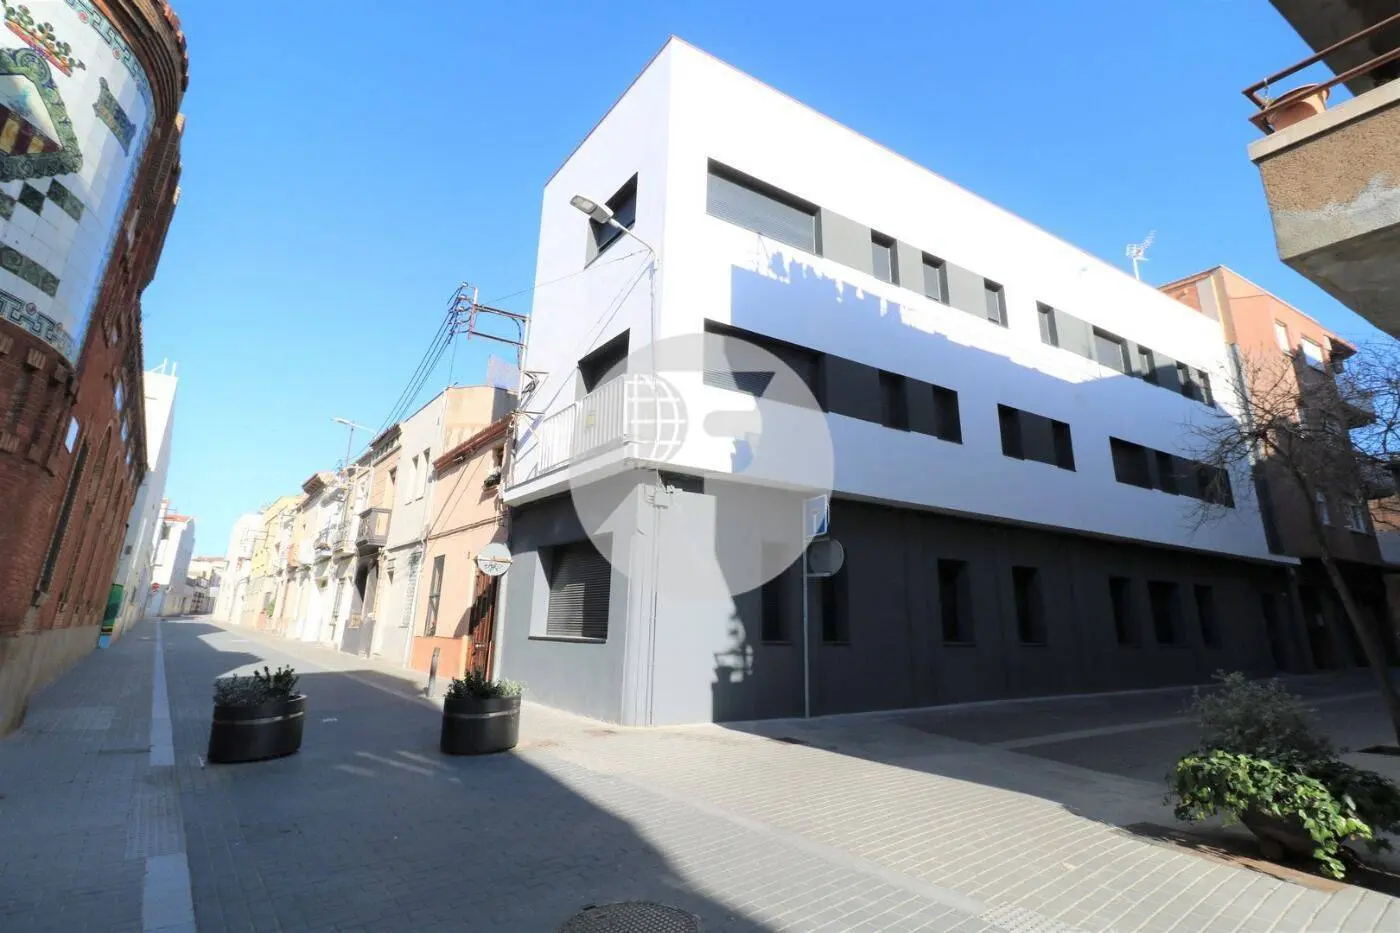 Magnificent new development in the centre of Sabadell. 19